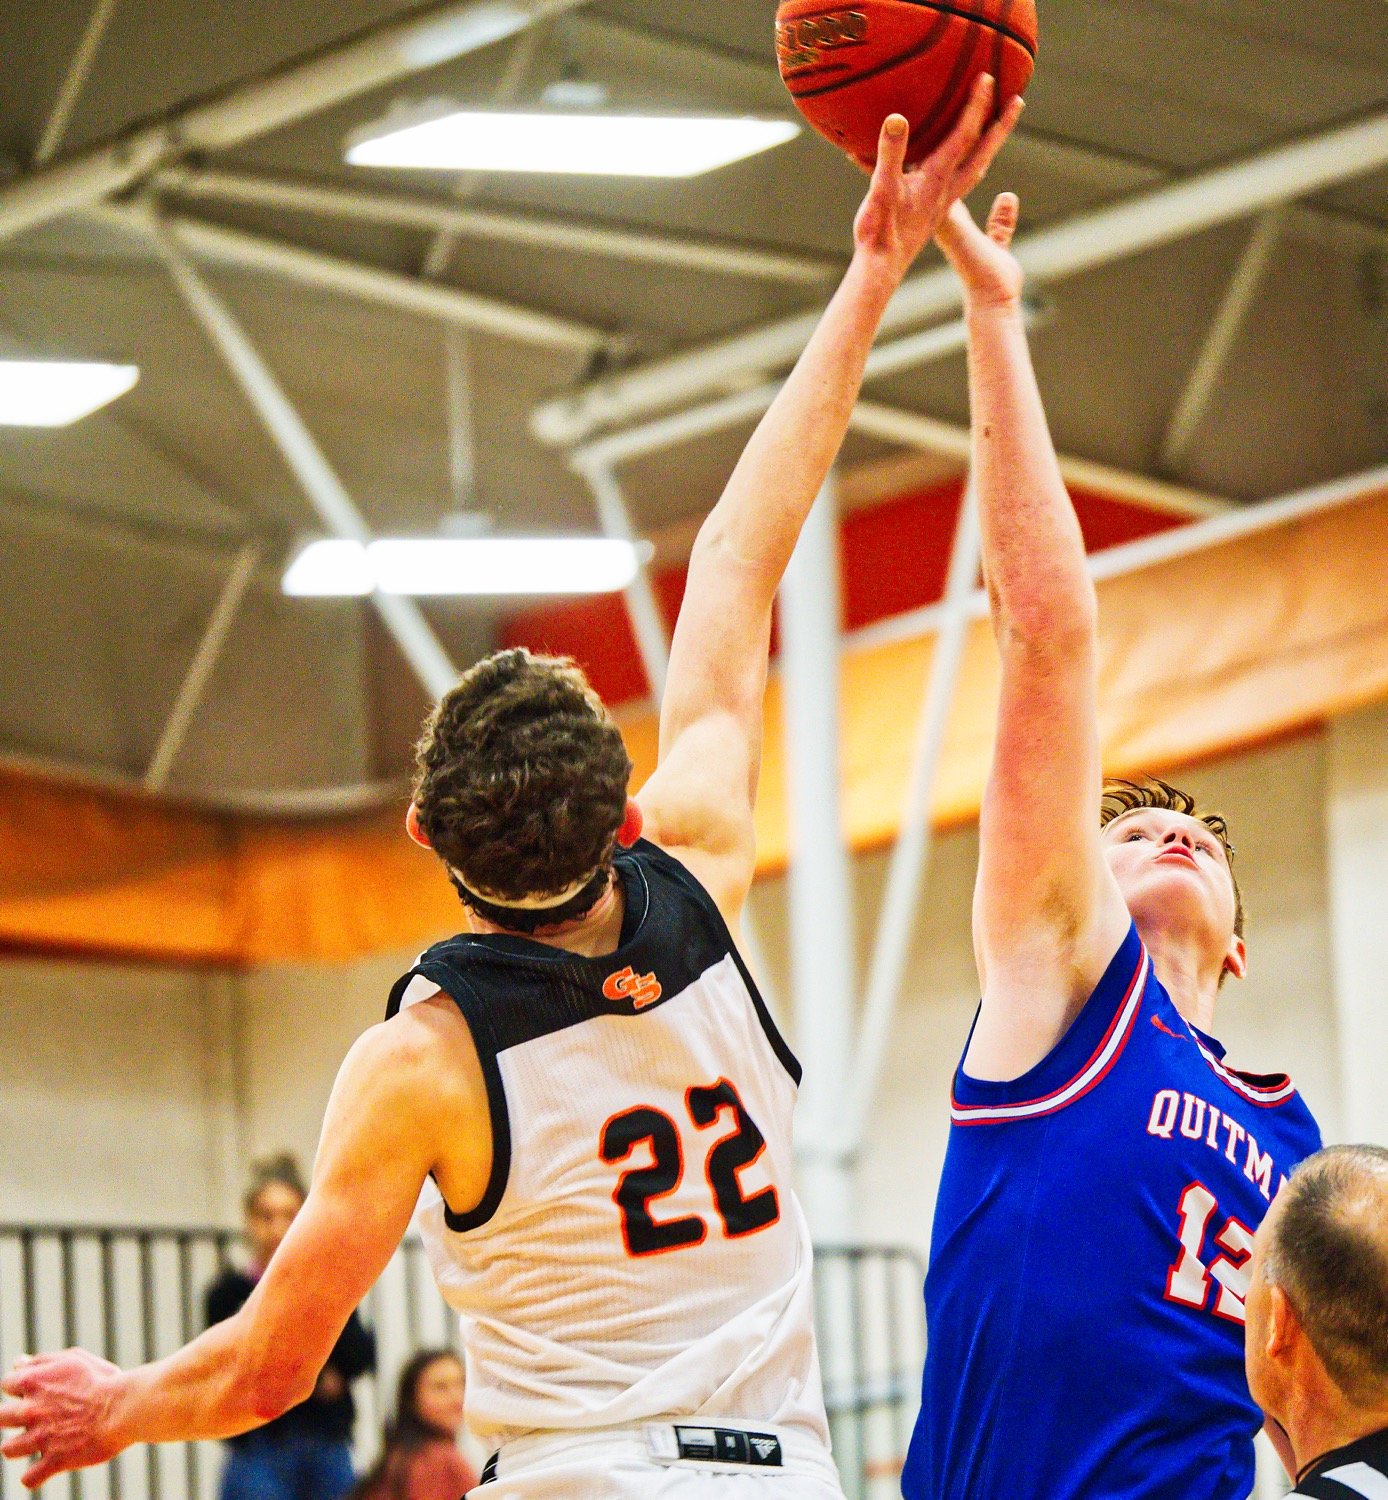 Landon Richey (12) fights for the tipoff to begin the first overtime period.